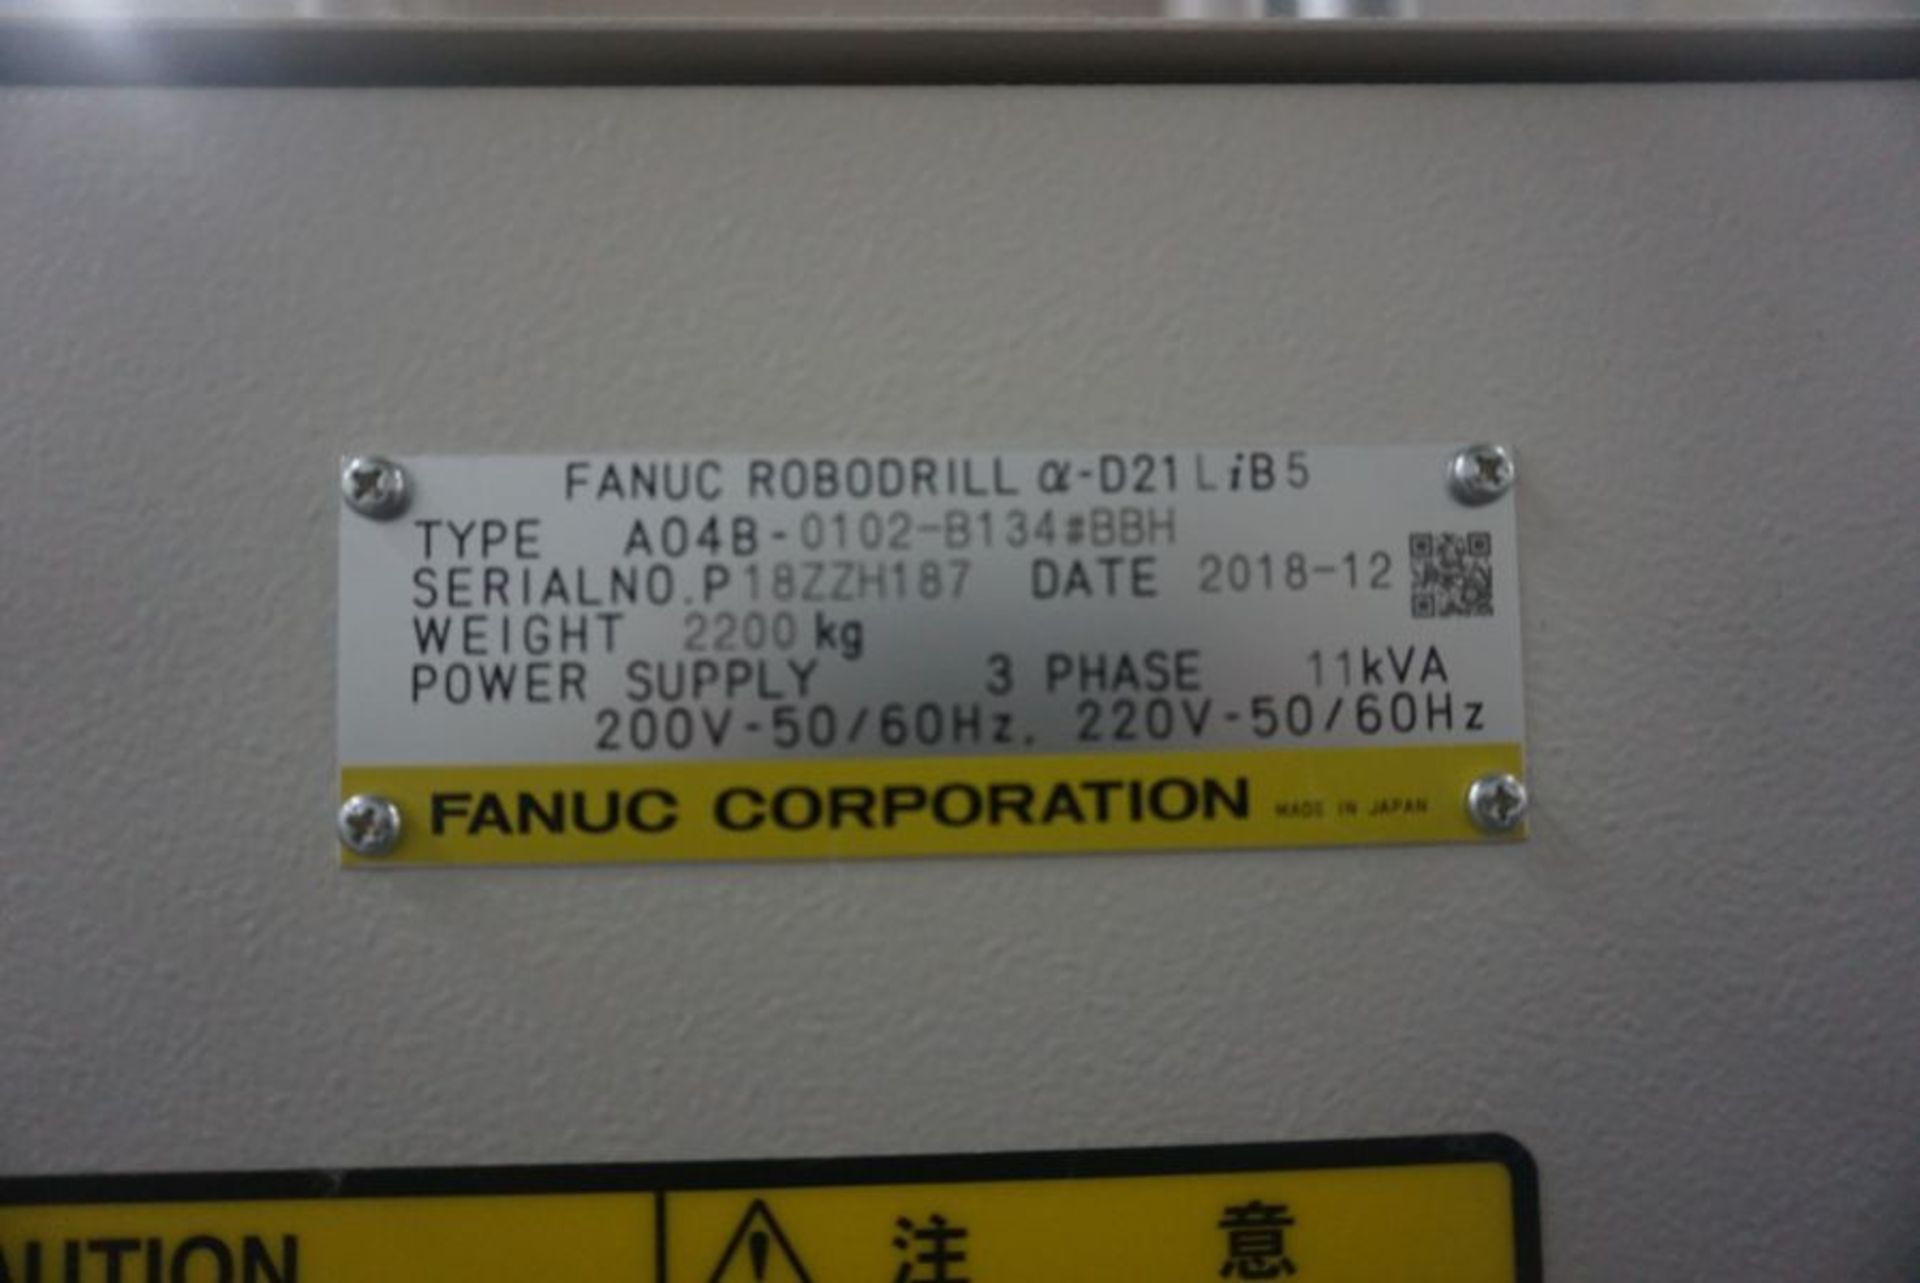 Fanuc Robodrill D21LiB5 5-Axis Vertical Machining Center, New 2018 *with Lots 2 & 3* - Image 6 of 10